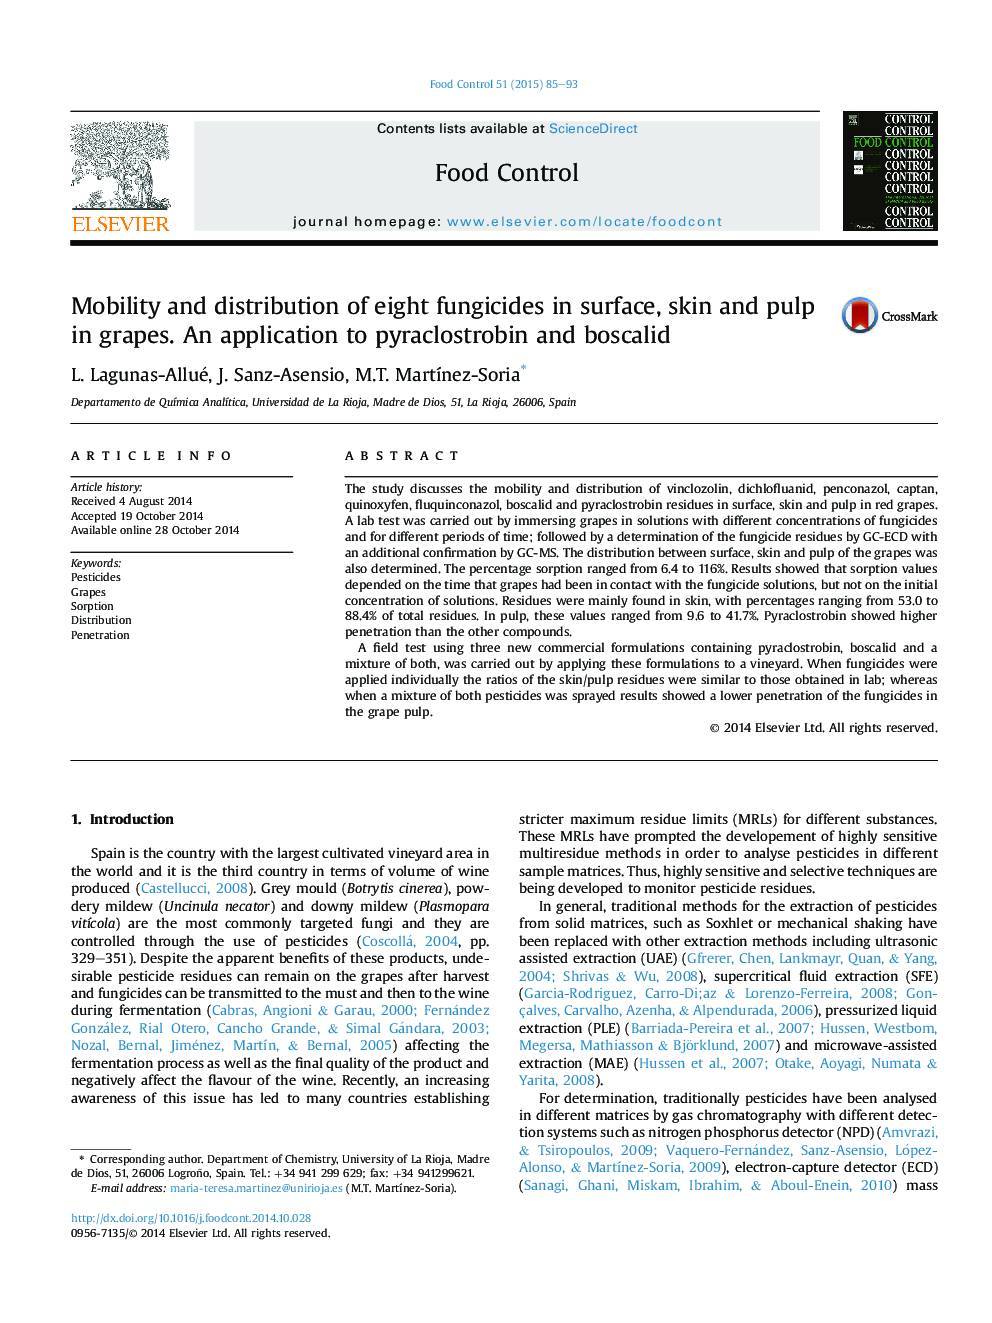 Mobility and distribution of eight fungicides in surface, skin and pulp in grapes. An application to pyraclostrobin and boscalid